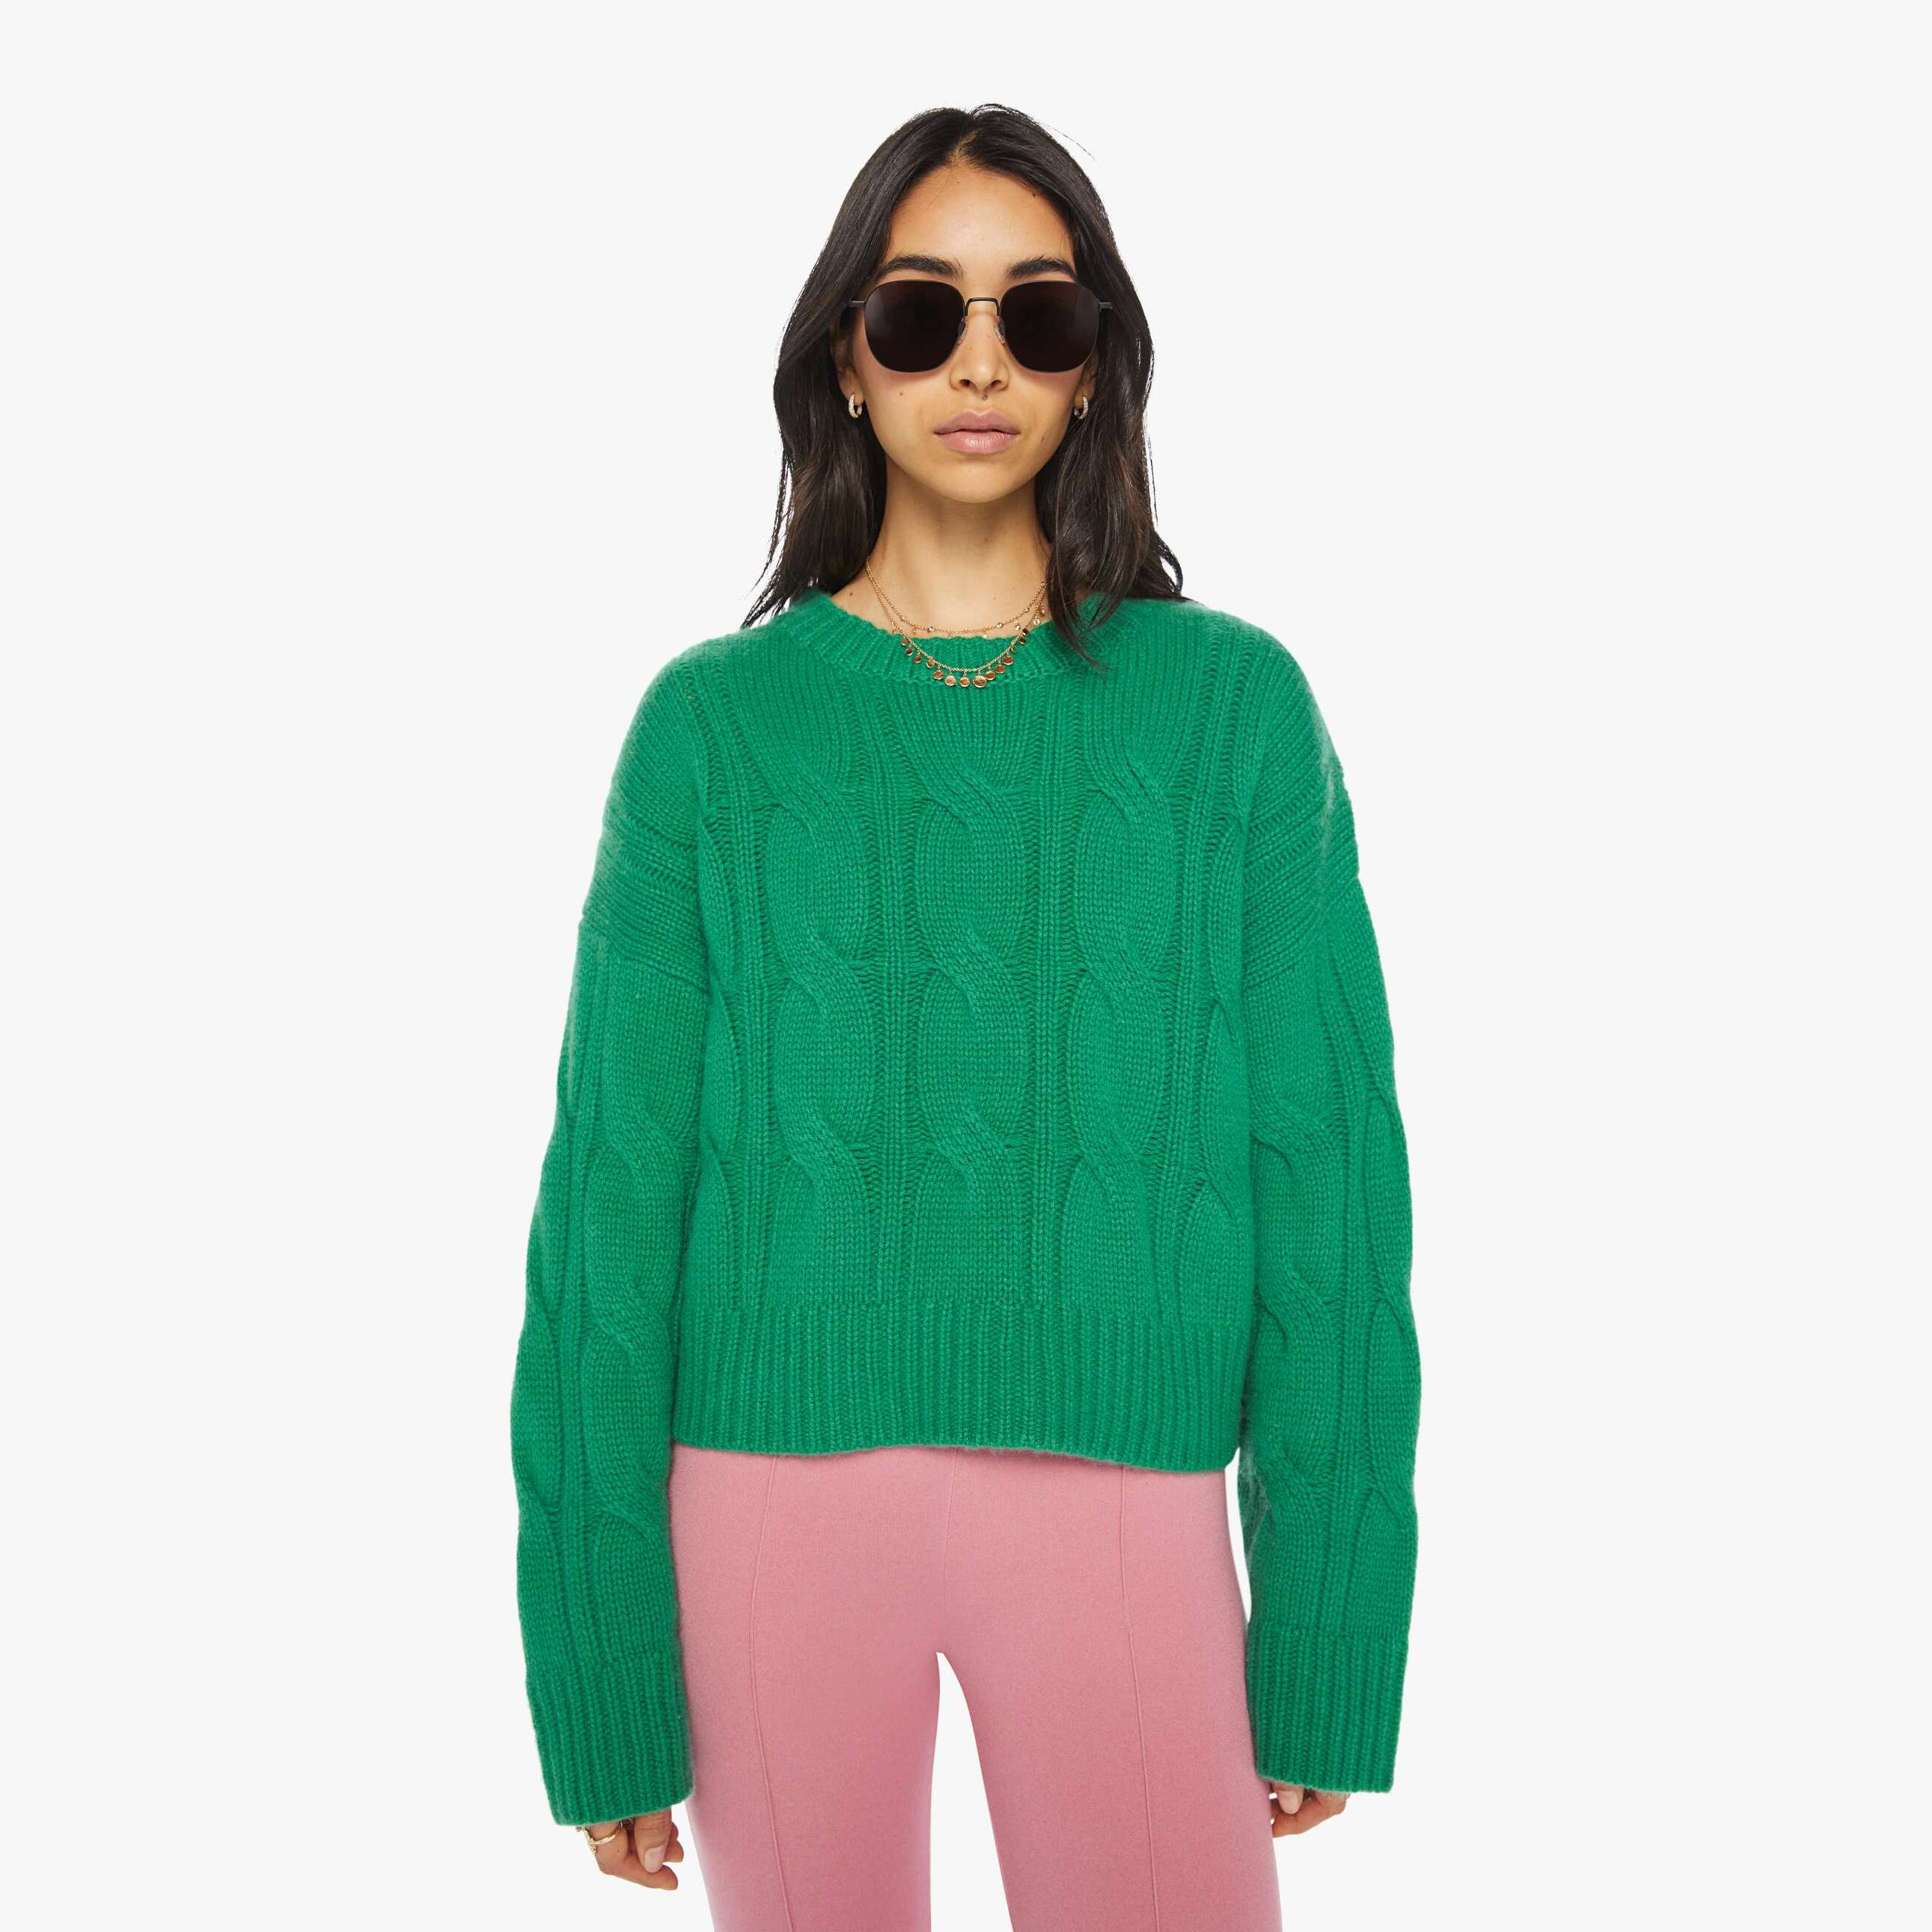 Shop Sablyn Tristan Cable Knit Sweater Neptune In Green - Size Medium